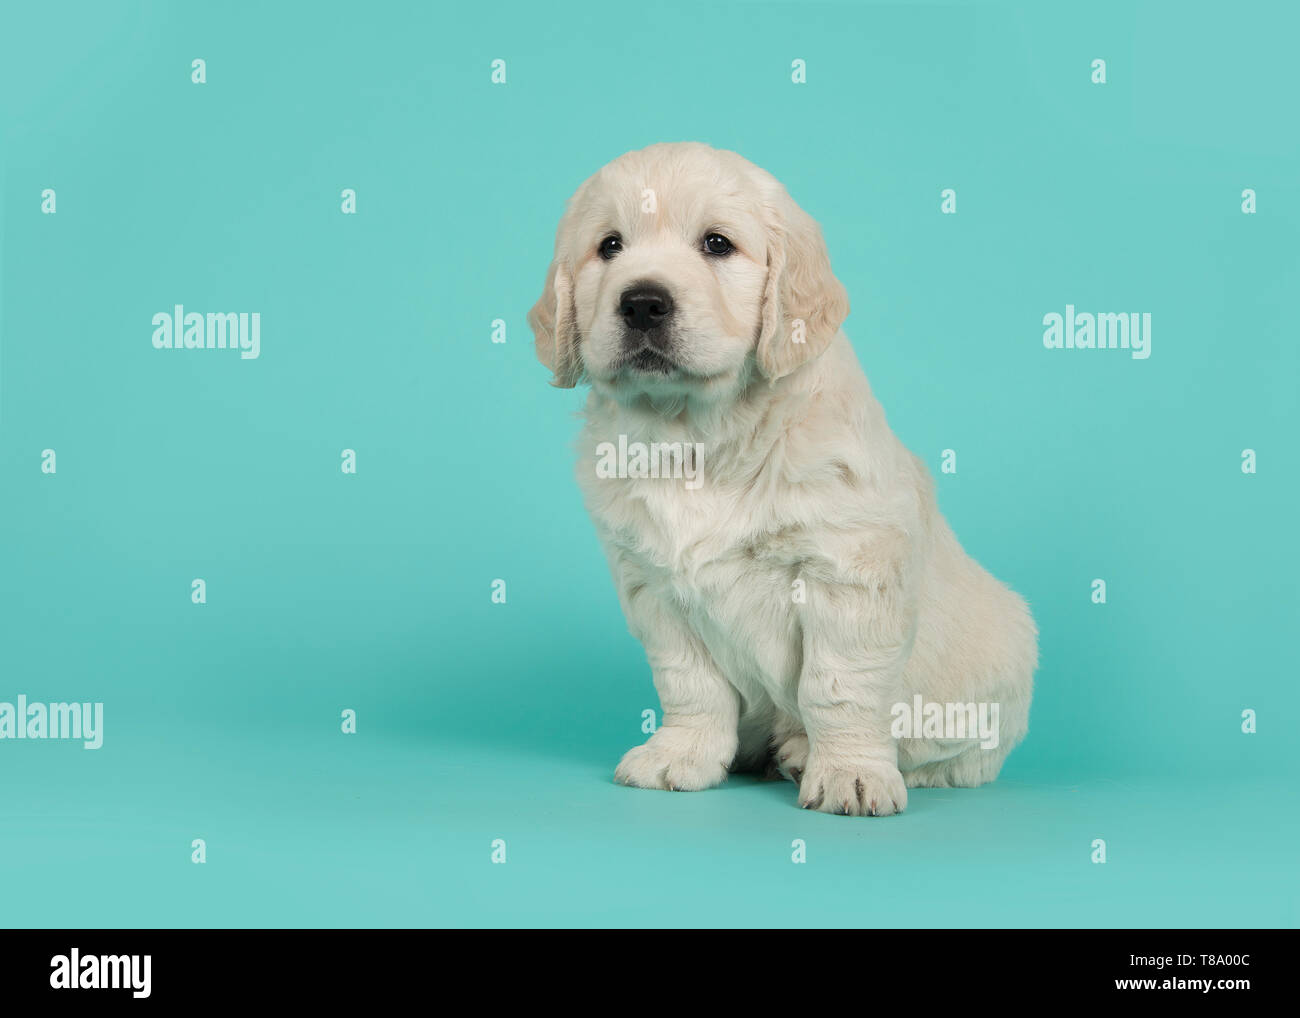 Cute golden retriever puppy seen from the side glancing away sitting on a turquoise blue background Stock Photo